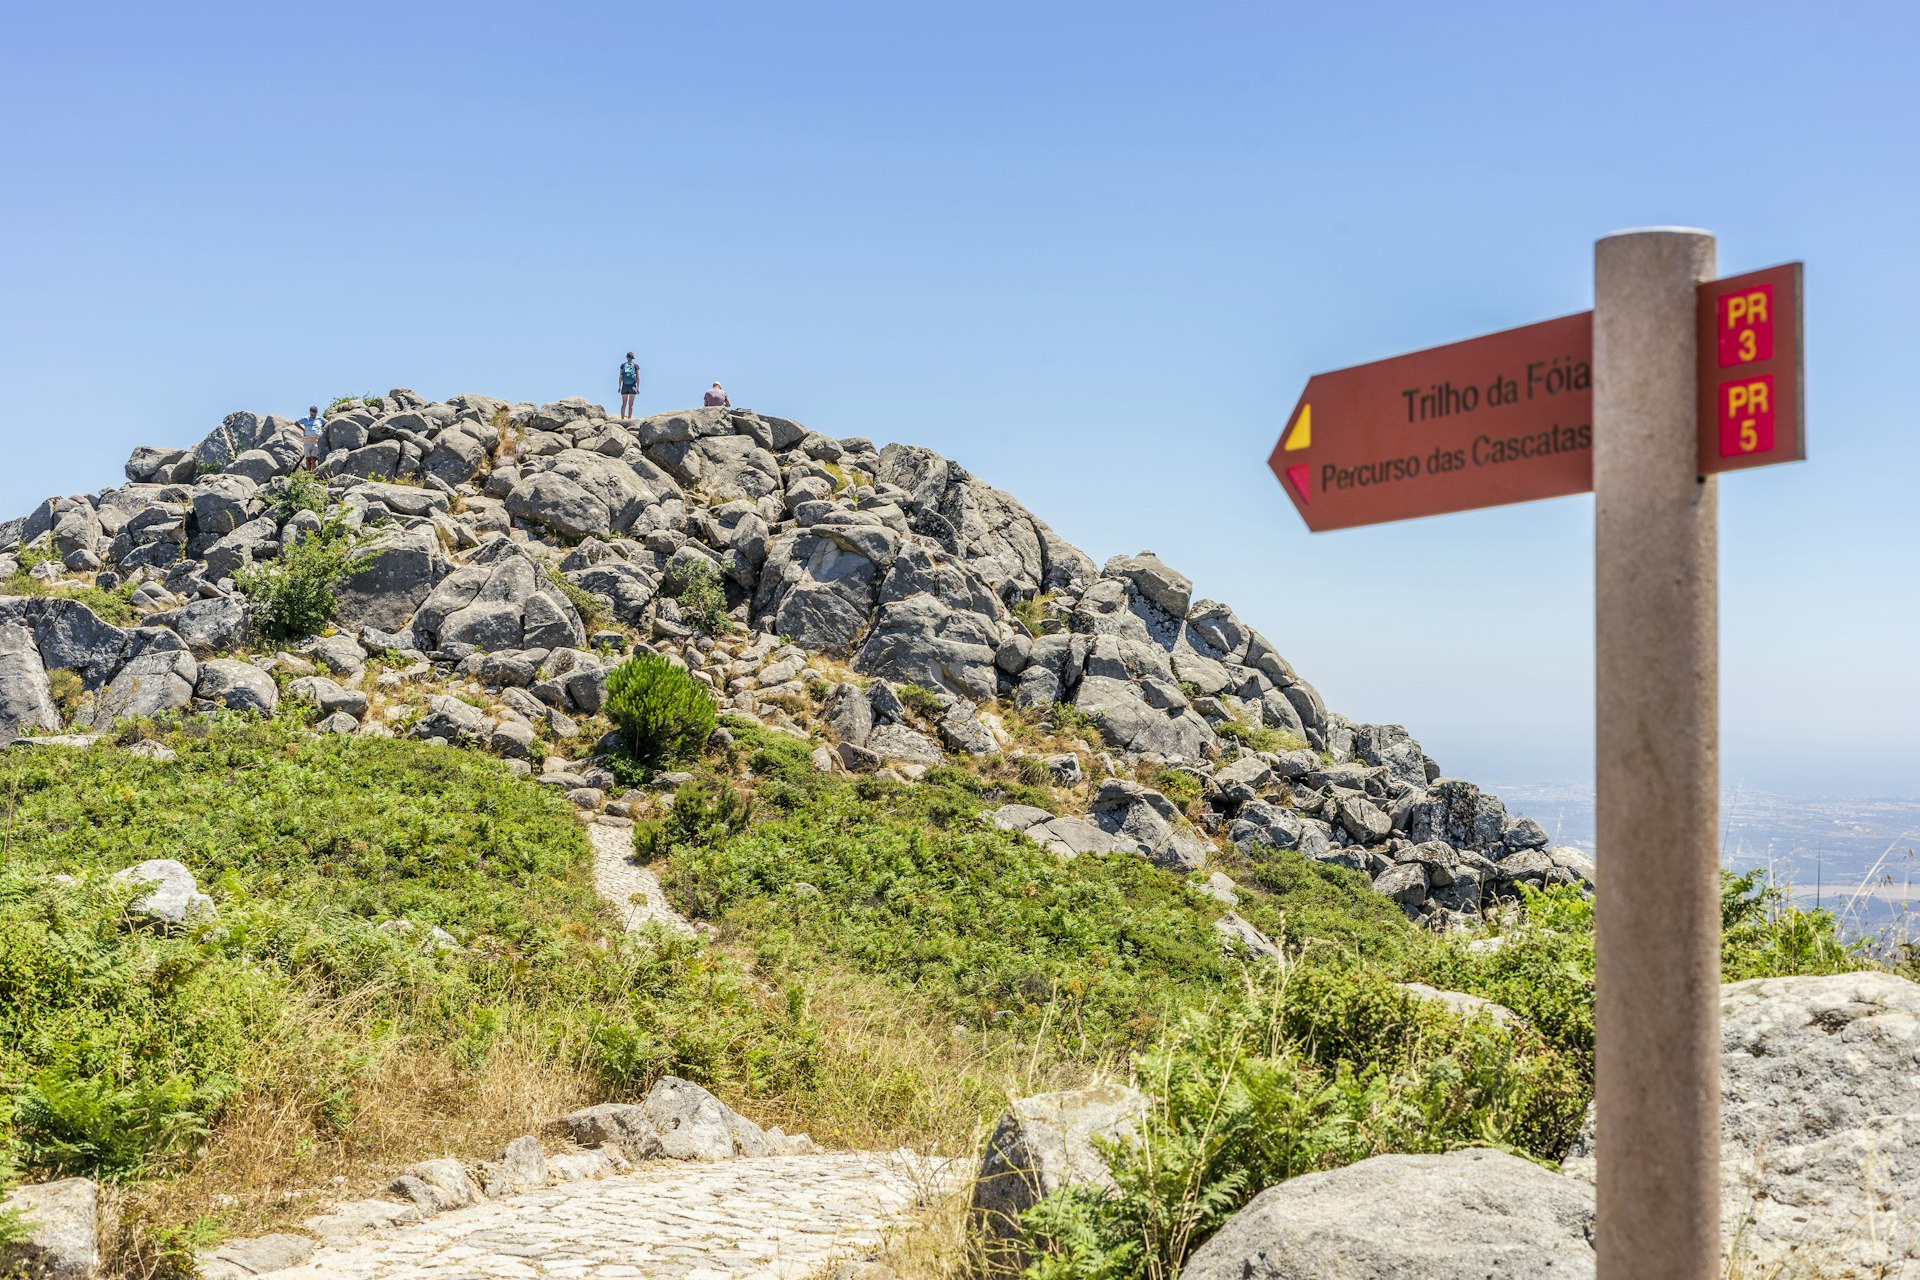 A sign points in the direction of Fóia, the highest point of the Algarve in Portugal. A hiker stands on top of the peak in the background.